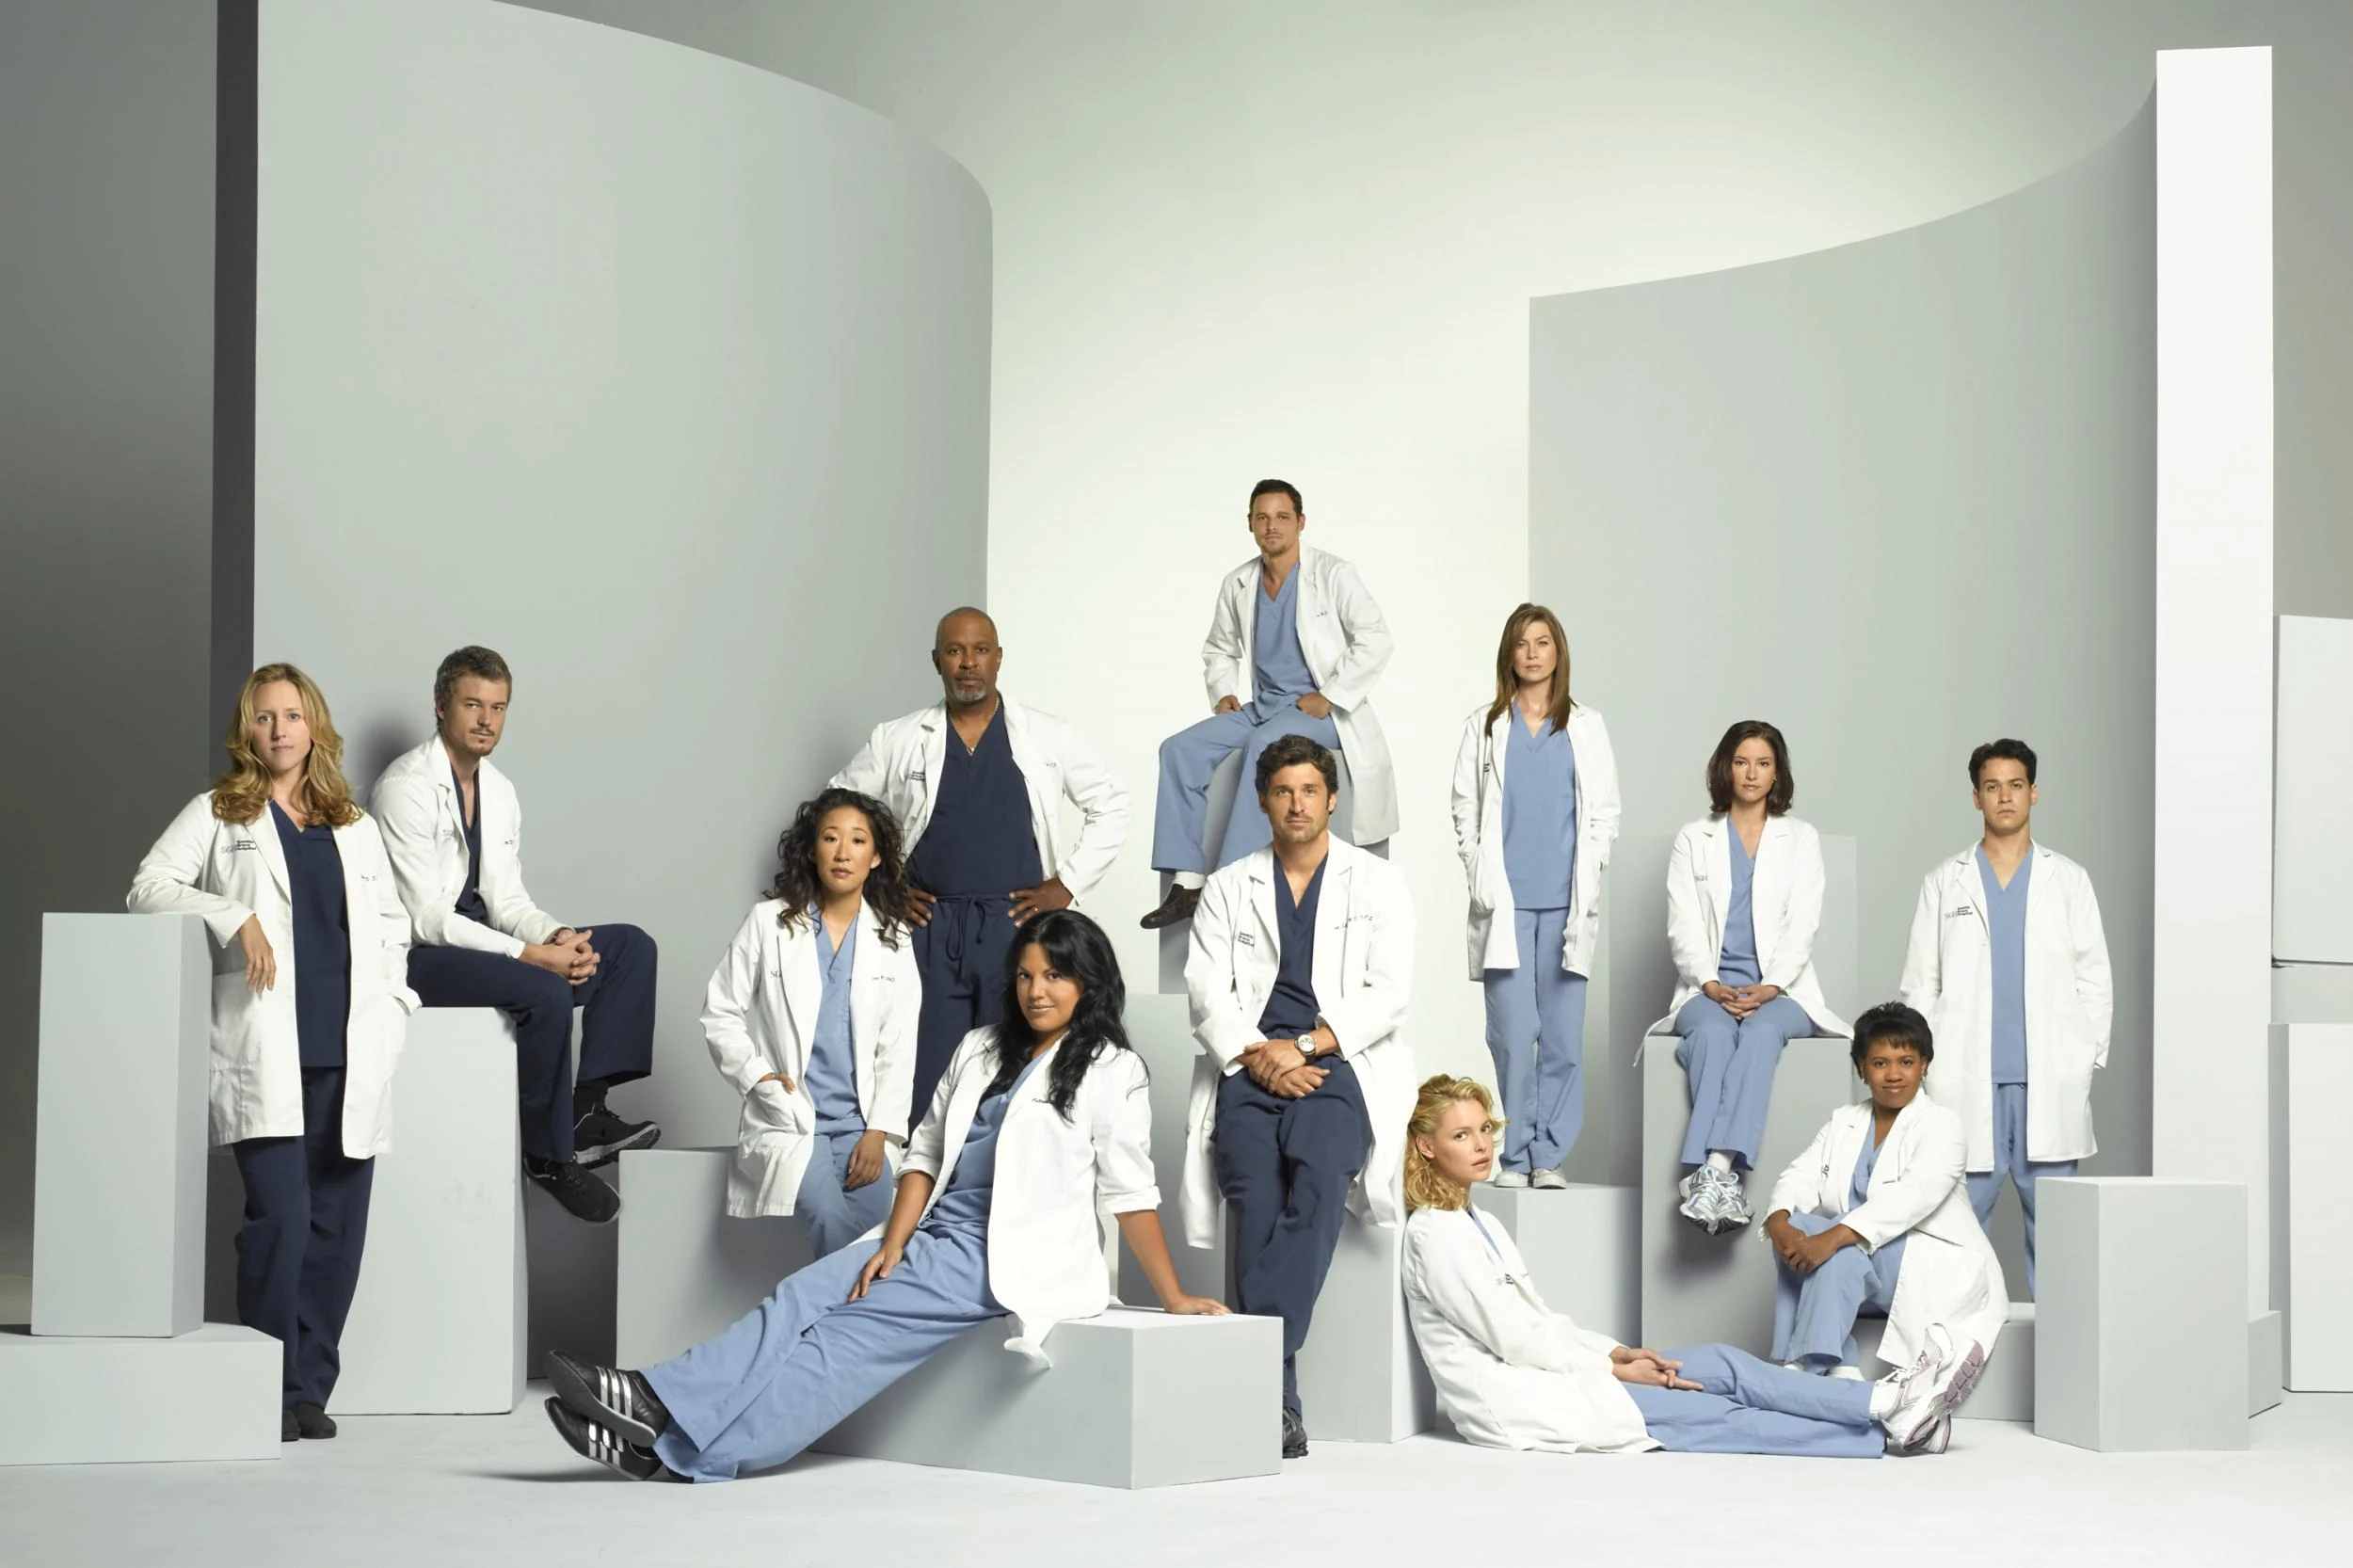 The Curtain Call for Grey's Anatomy A Look Back at Two Decades of Medical Drama Mastery